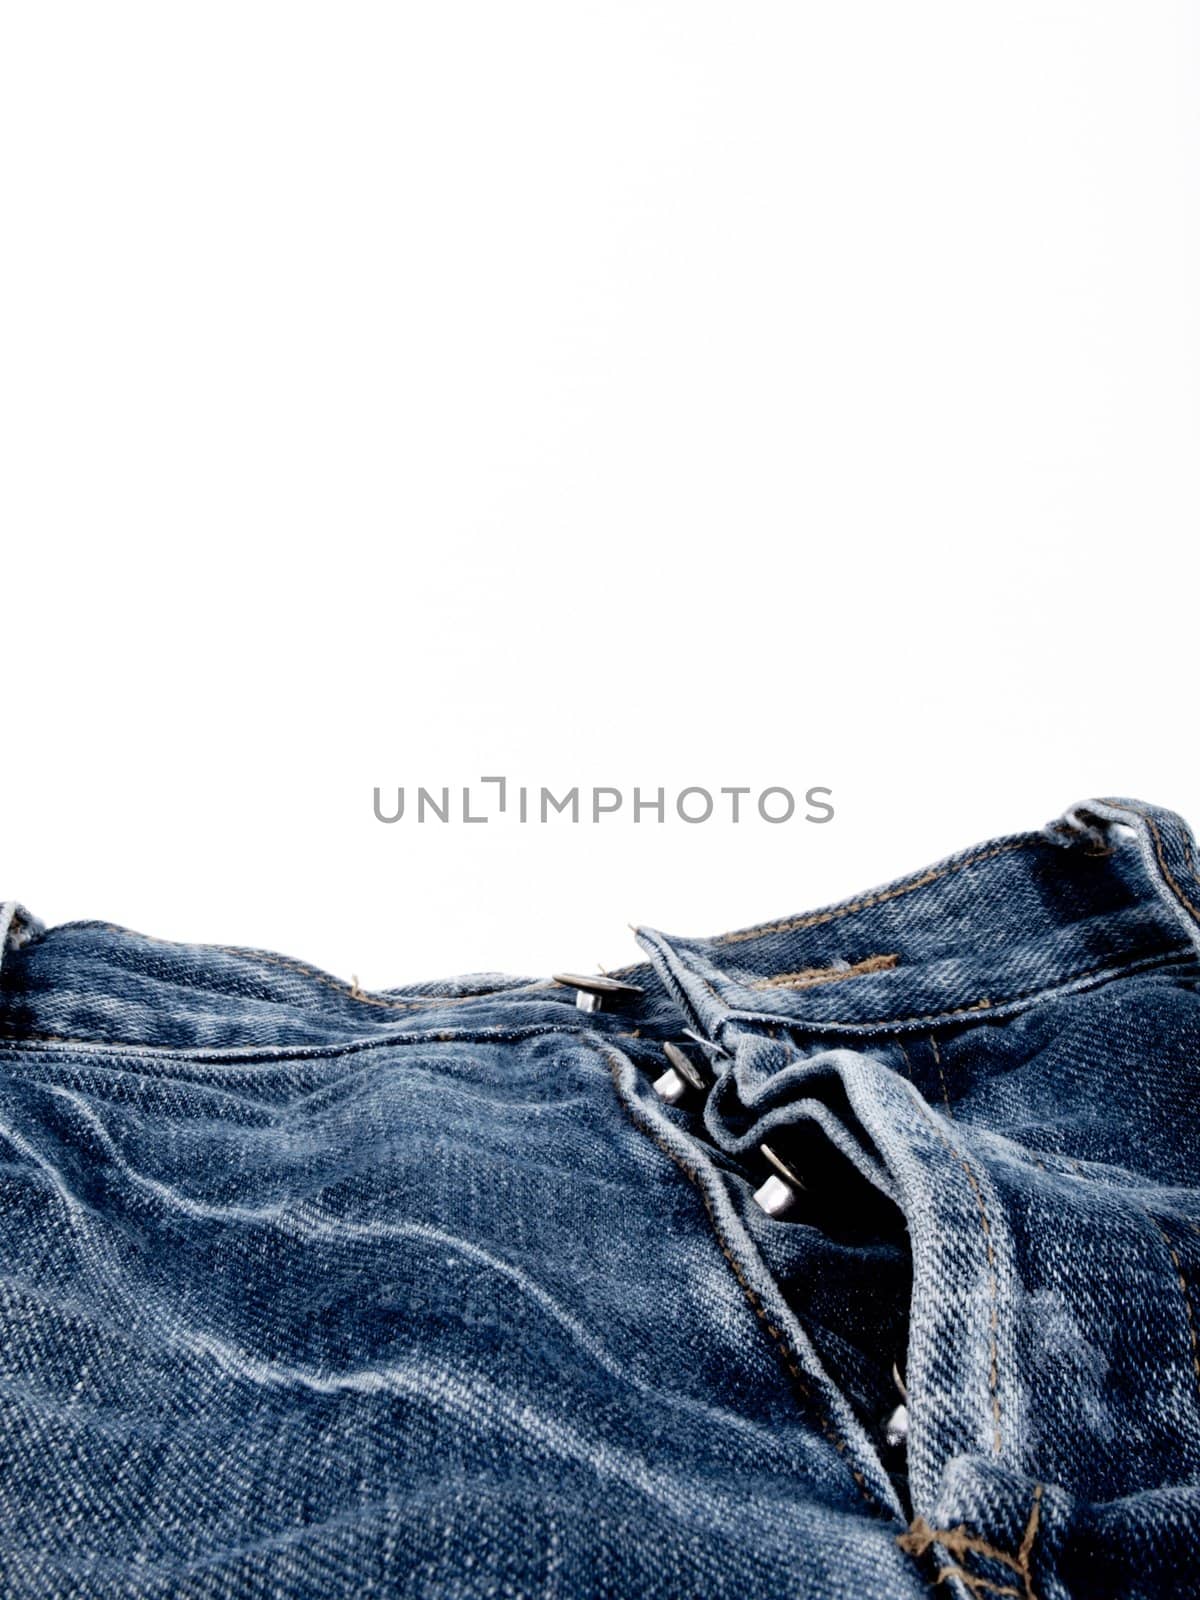 close-up button fly jeans on white background